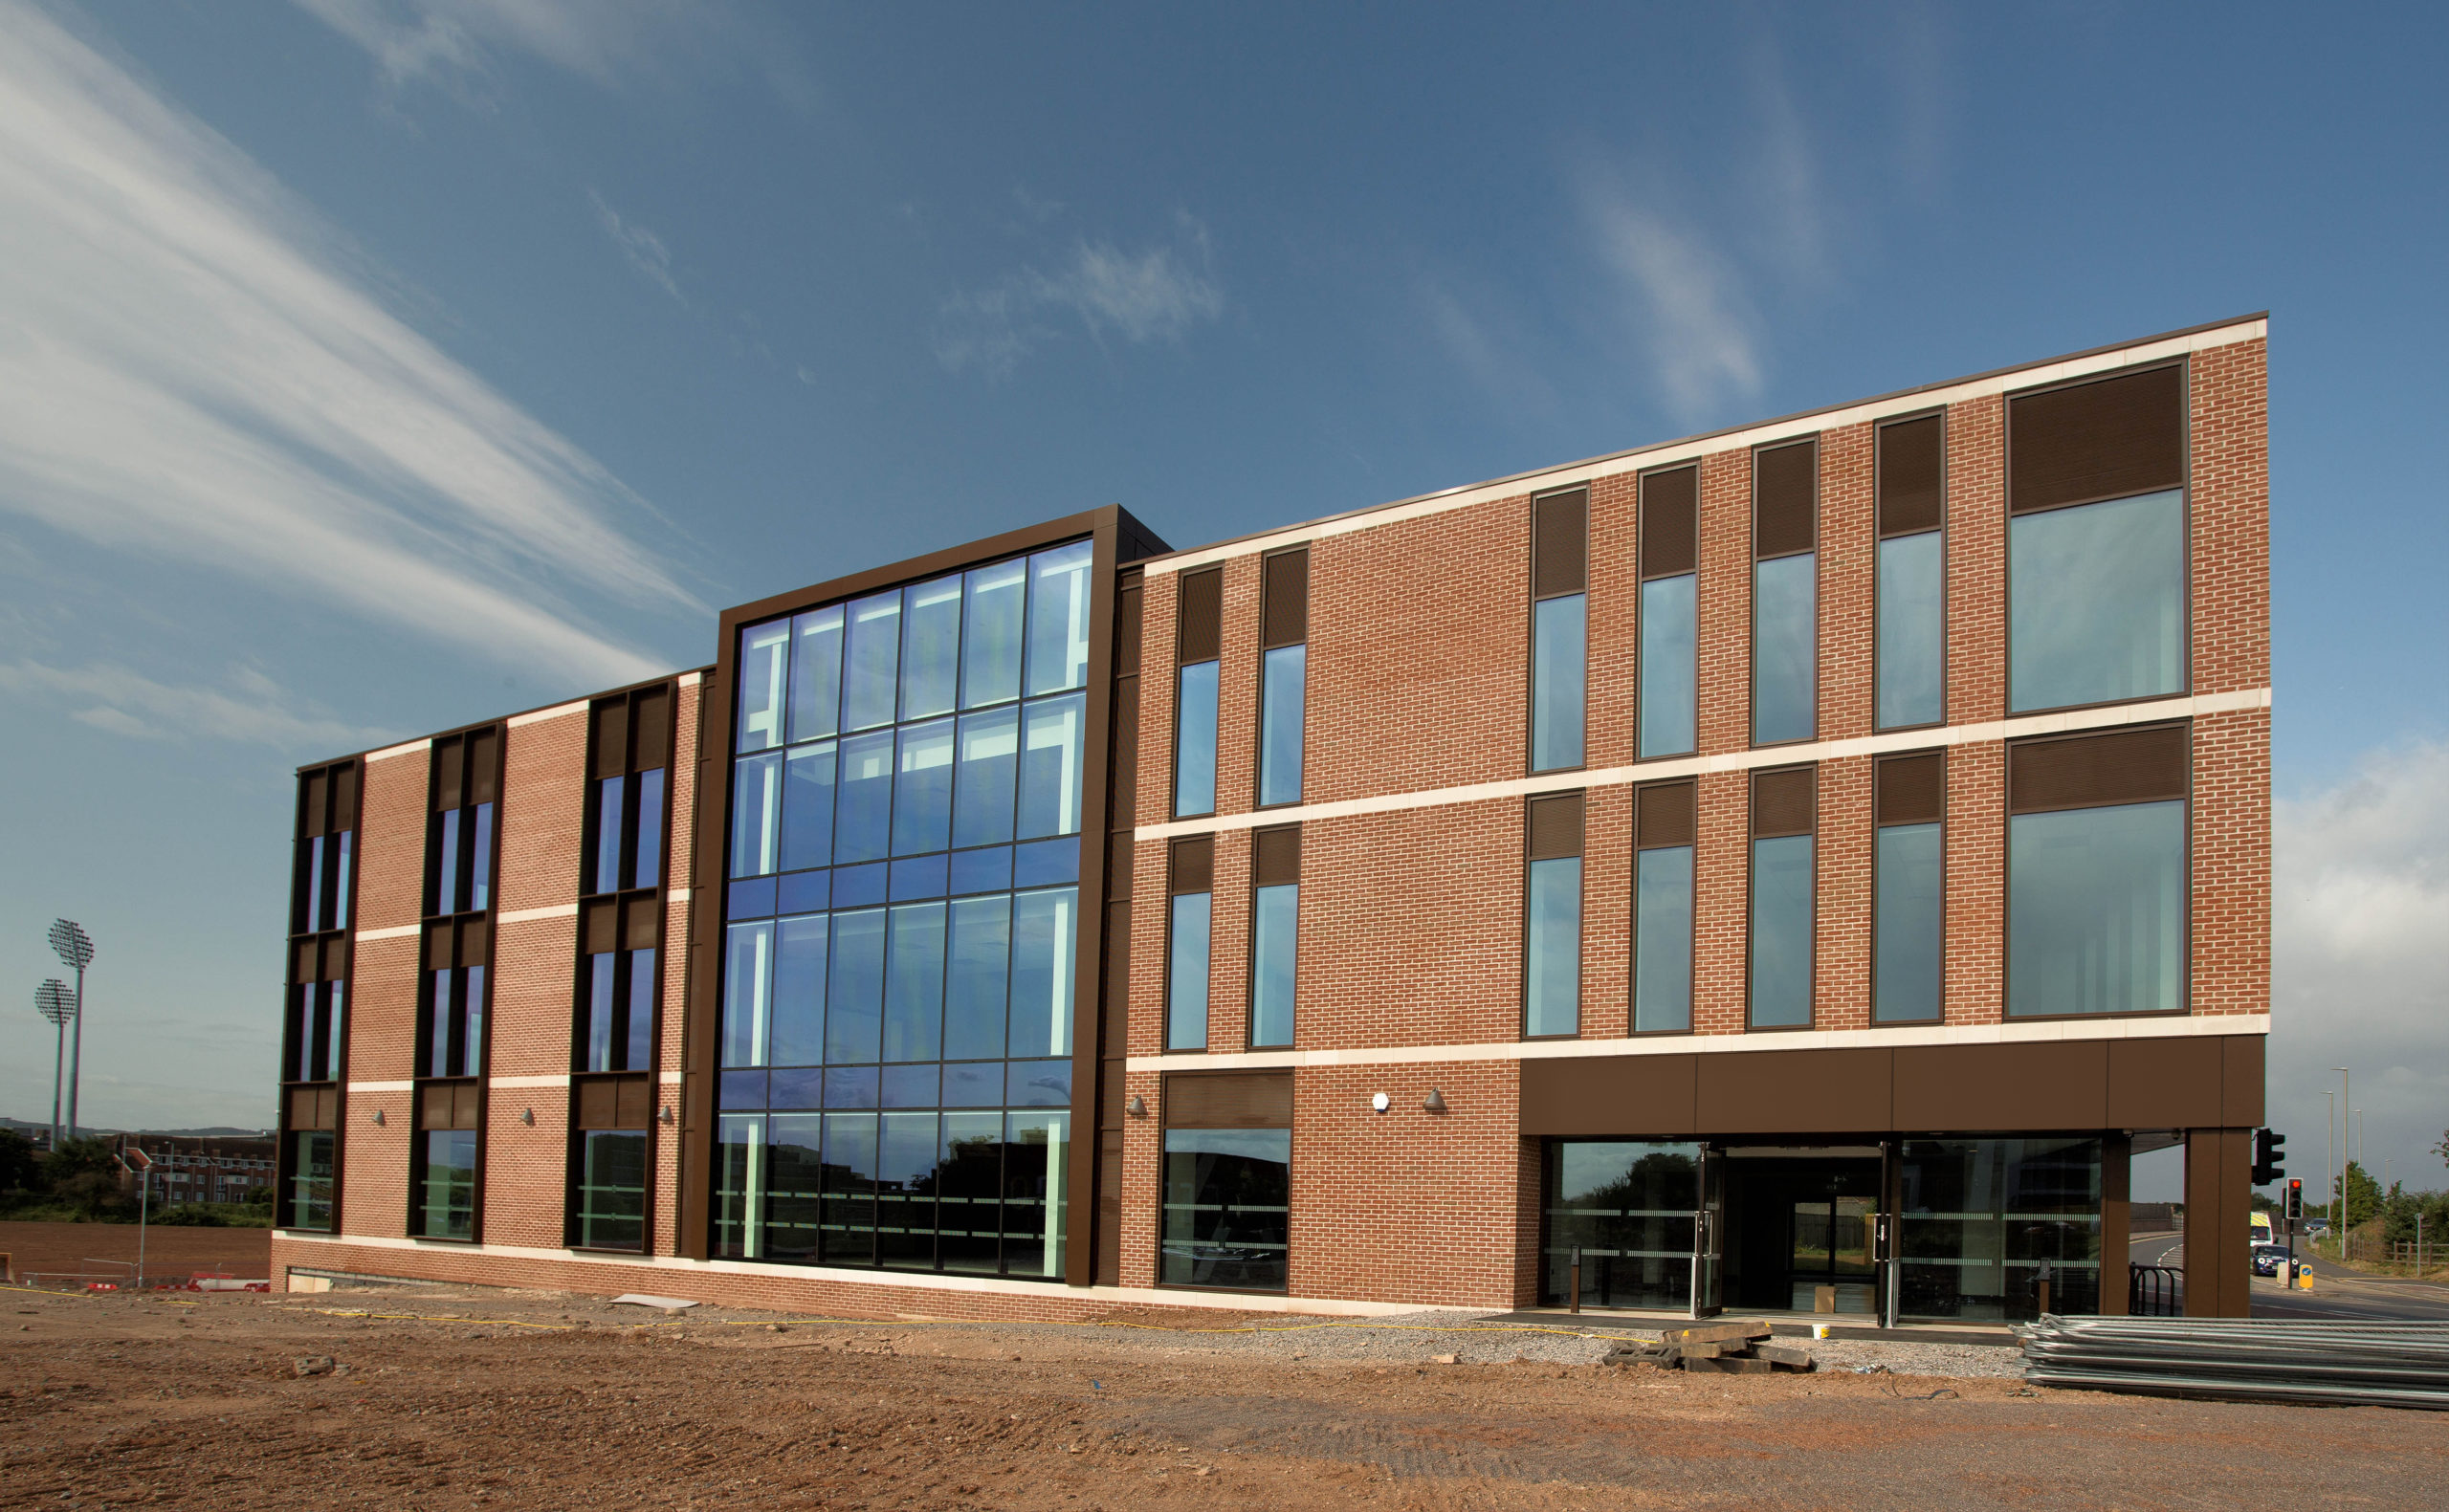 An outside view of the Firepool Centre for Digital Innovation. It is a three storey brick building with large floor to ceiling windows and a large section in the centre that is completely glazed